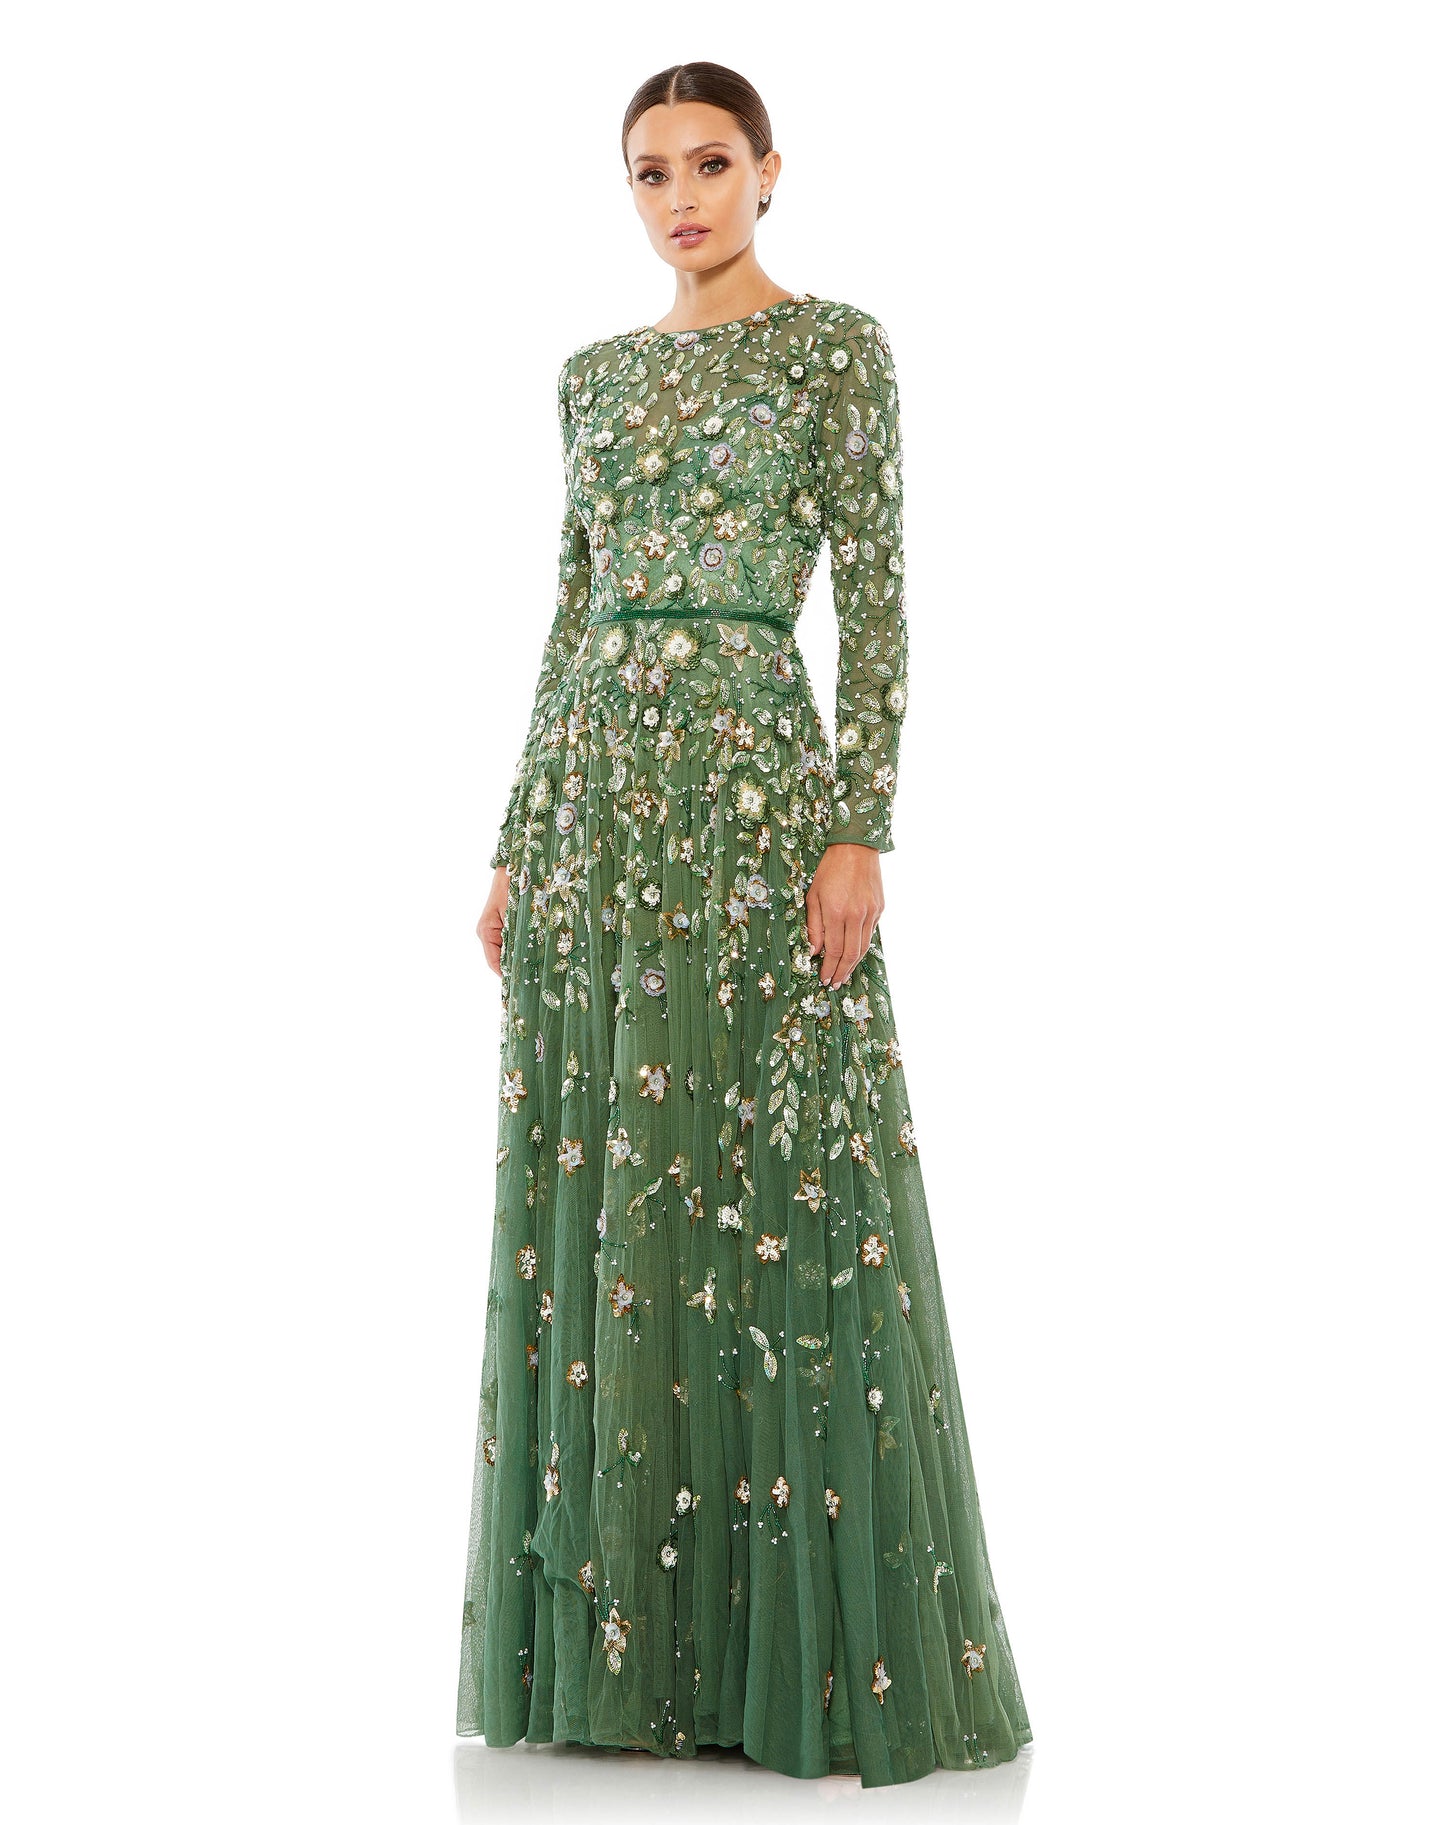 Mac Duggal Sheer hand-embellished tulle overlay; 100% polyester lining Partially lined bodice; fully lined skirt; semi-sheer unlined sleeves Round high neckline Long sleeves Beaded waist detail Allover hand-sequined floral appliqué complimented by pearl a